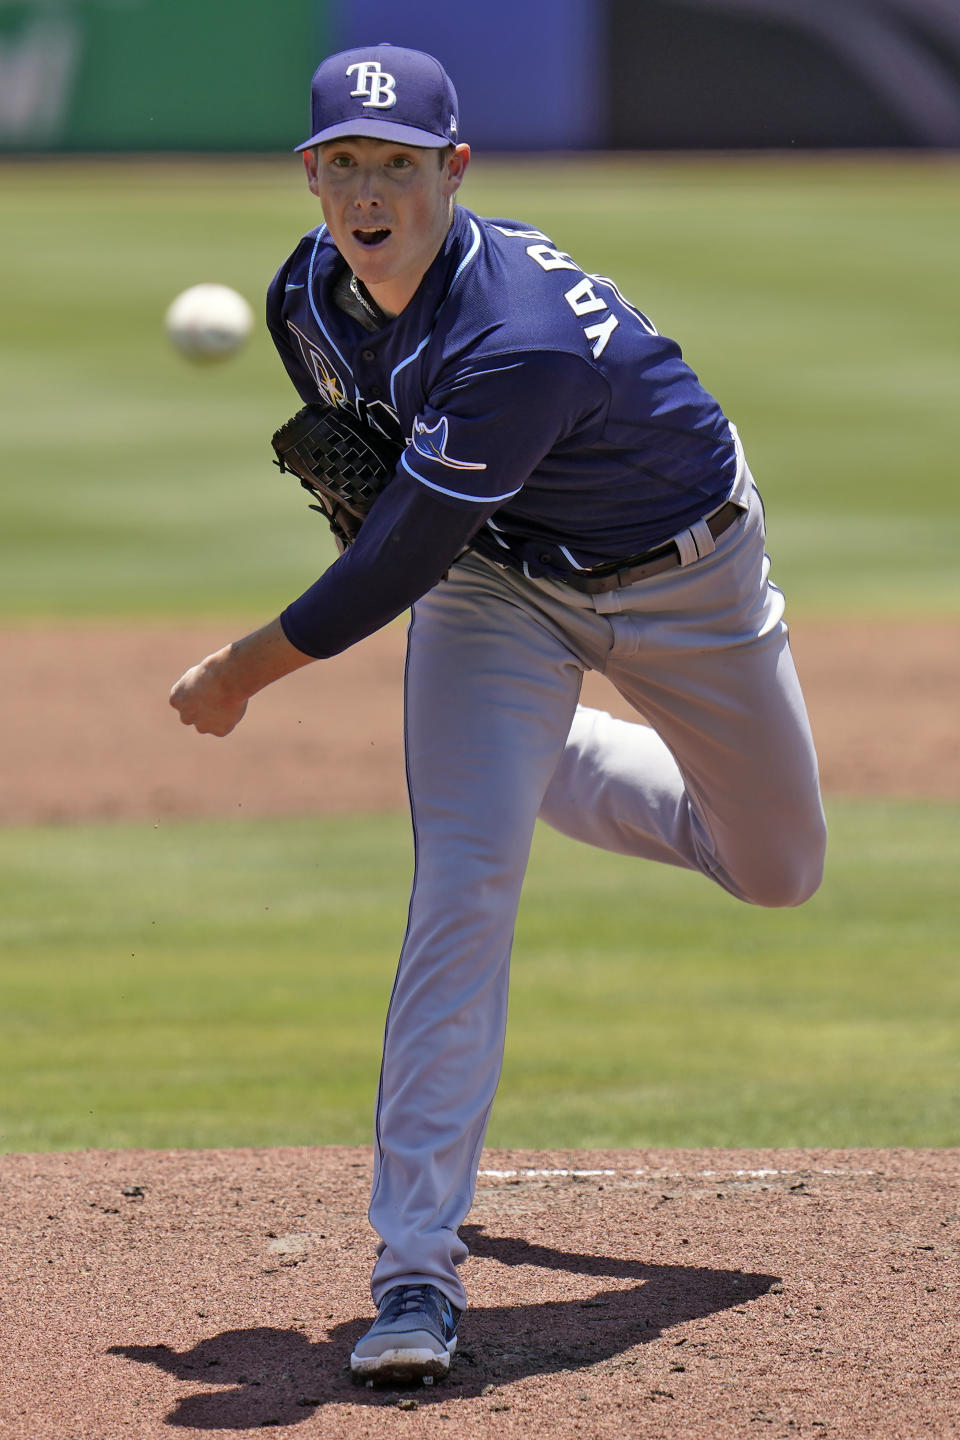 Tampa Bay Rays' Ryan Yarbrough pitches to the Toronto Blue Jays during the first inning of a baseball game Monday, May 24, 2021, in Dunedin, Fla. (AP Photo/Chris O'Meara)